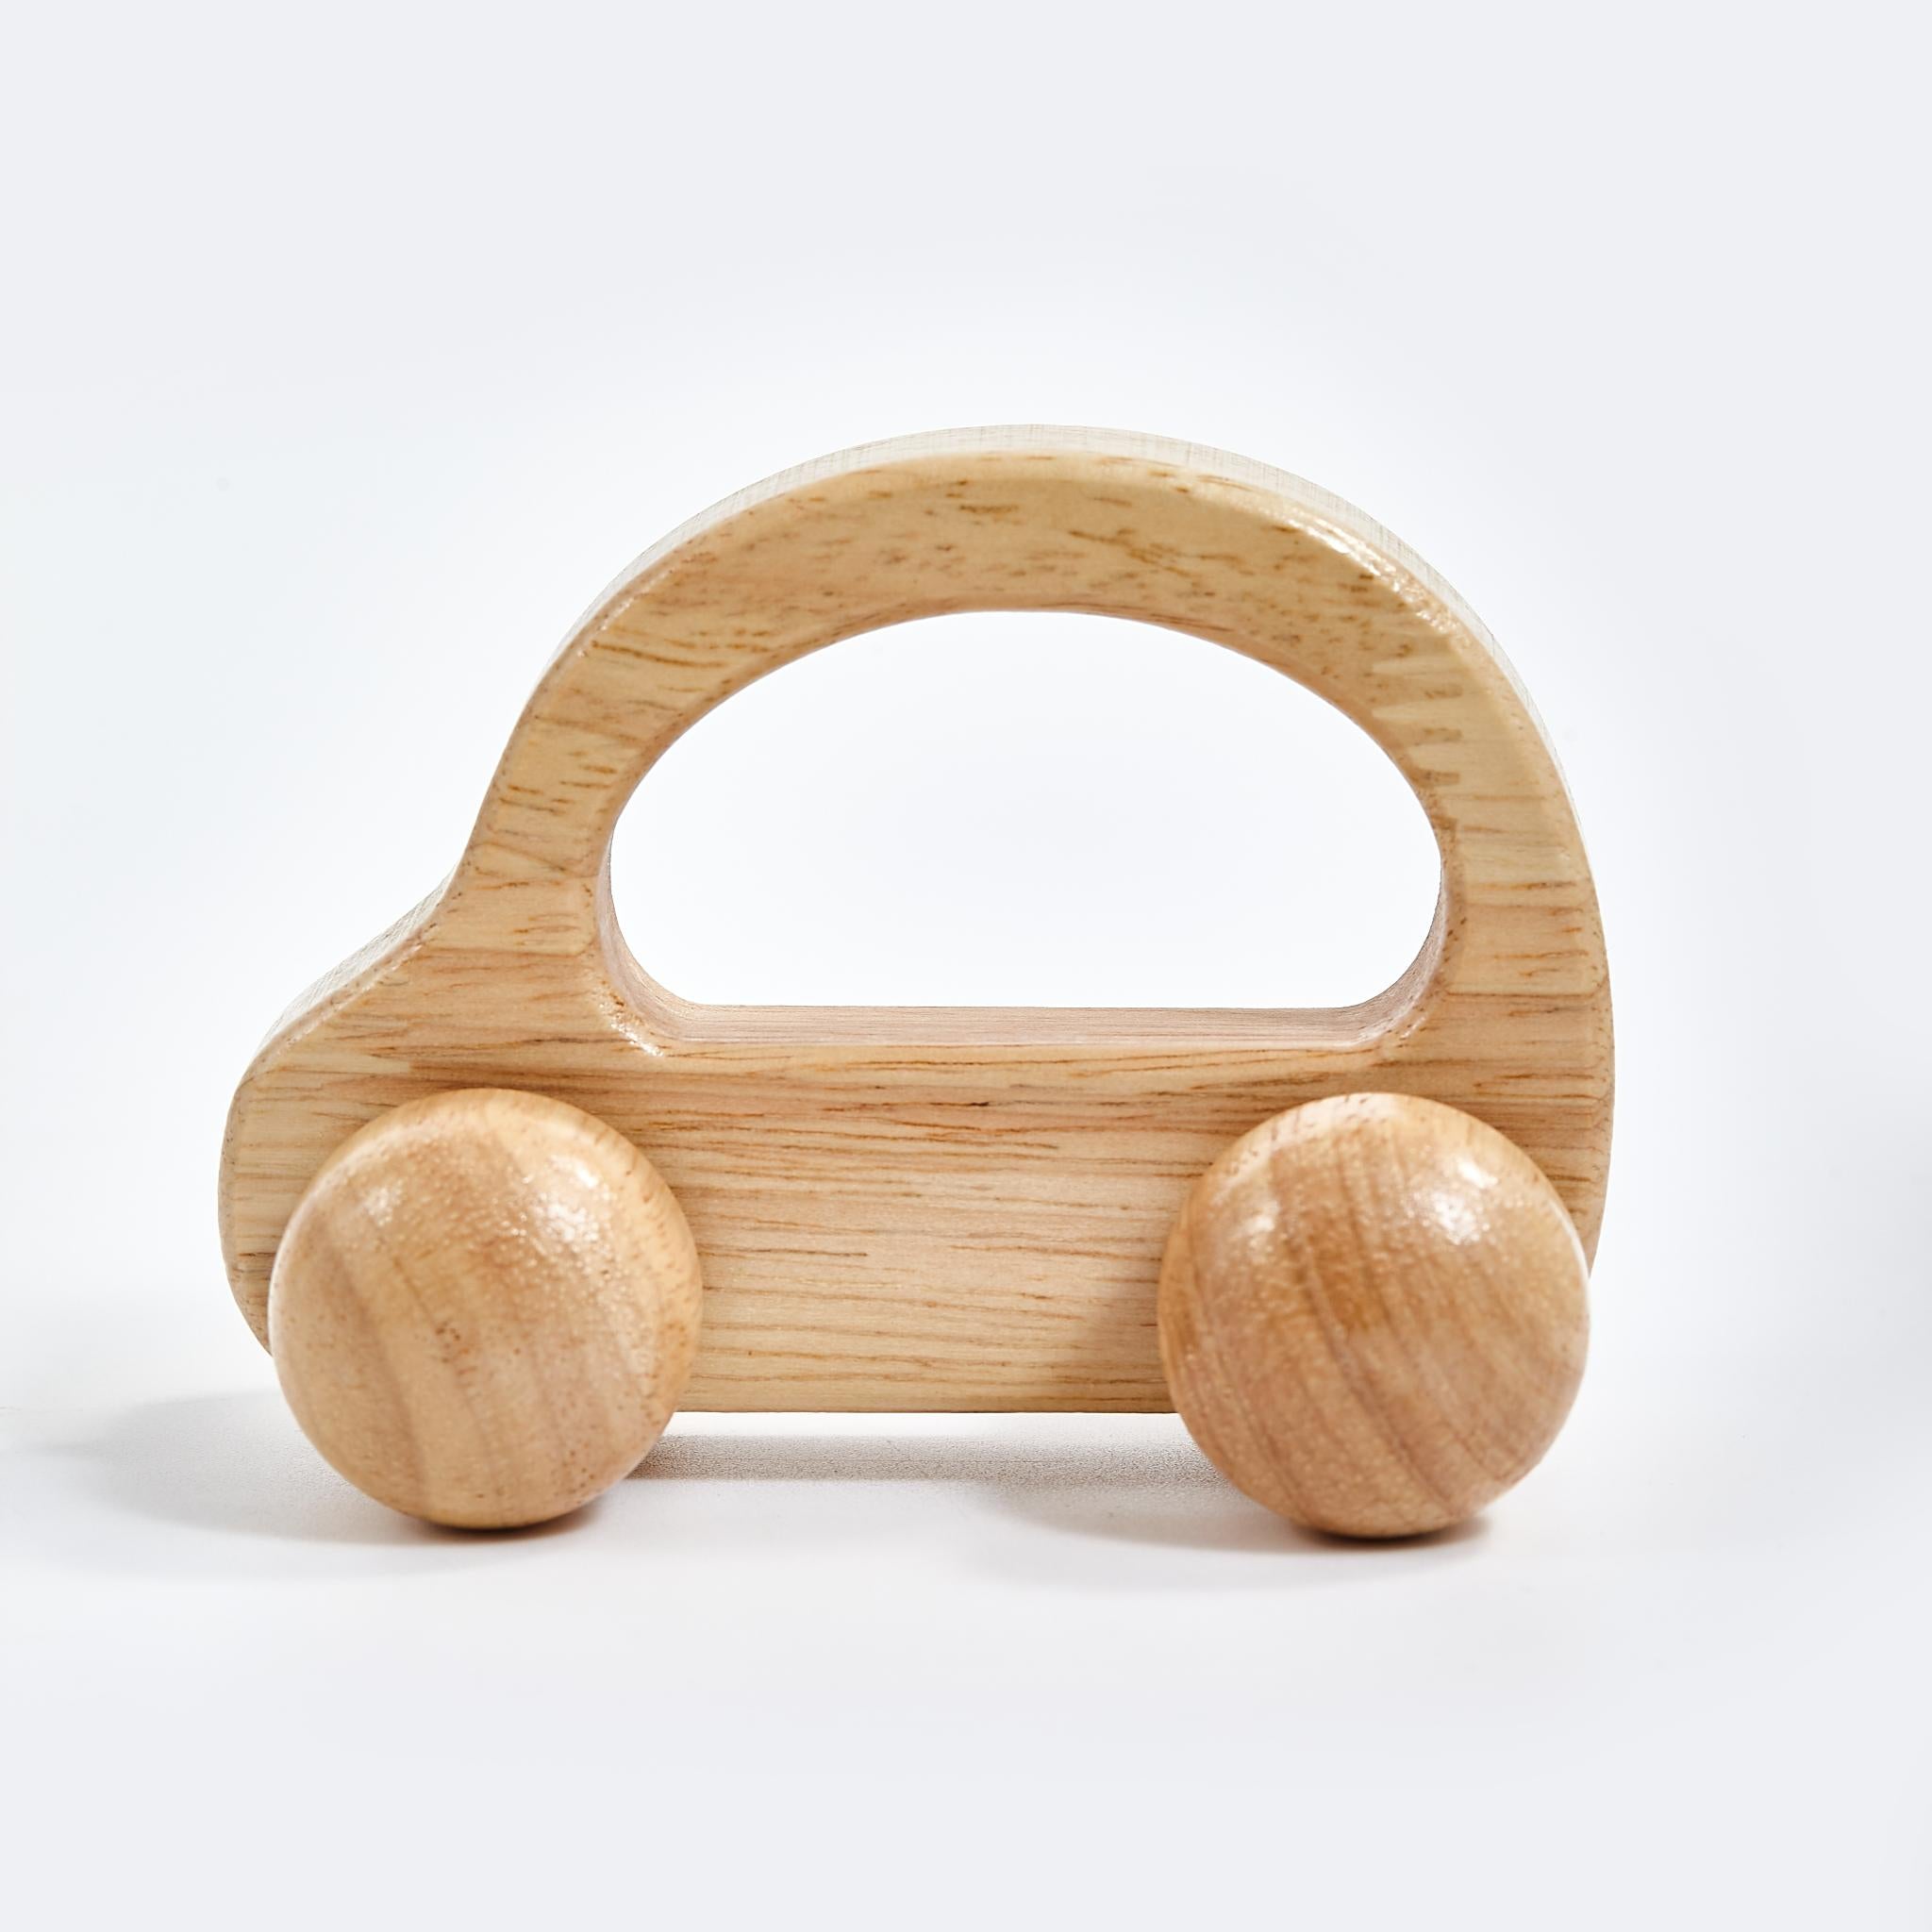 Wooden toy car with handle